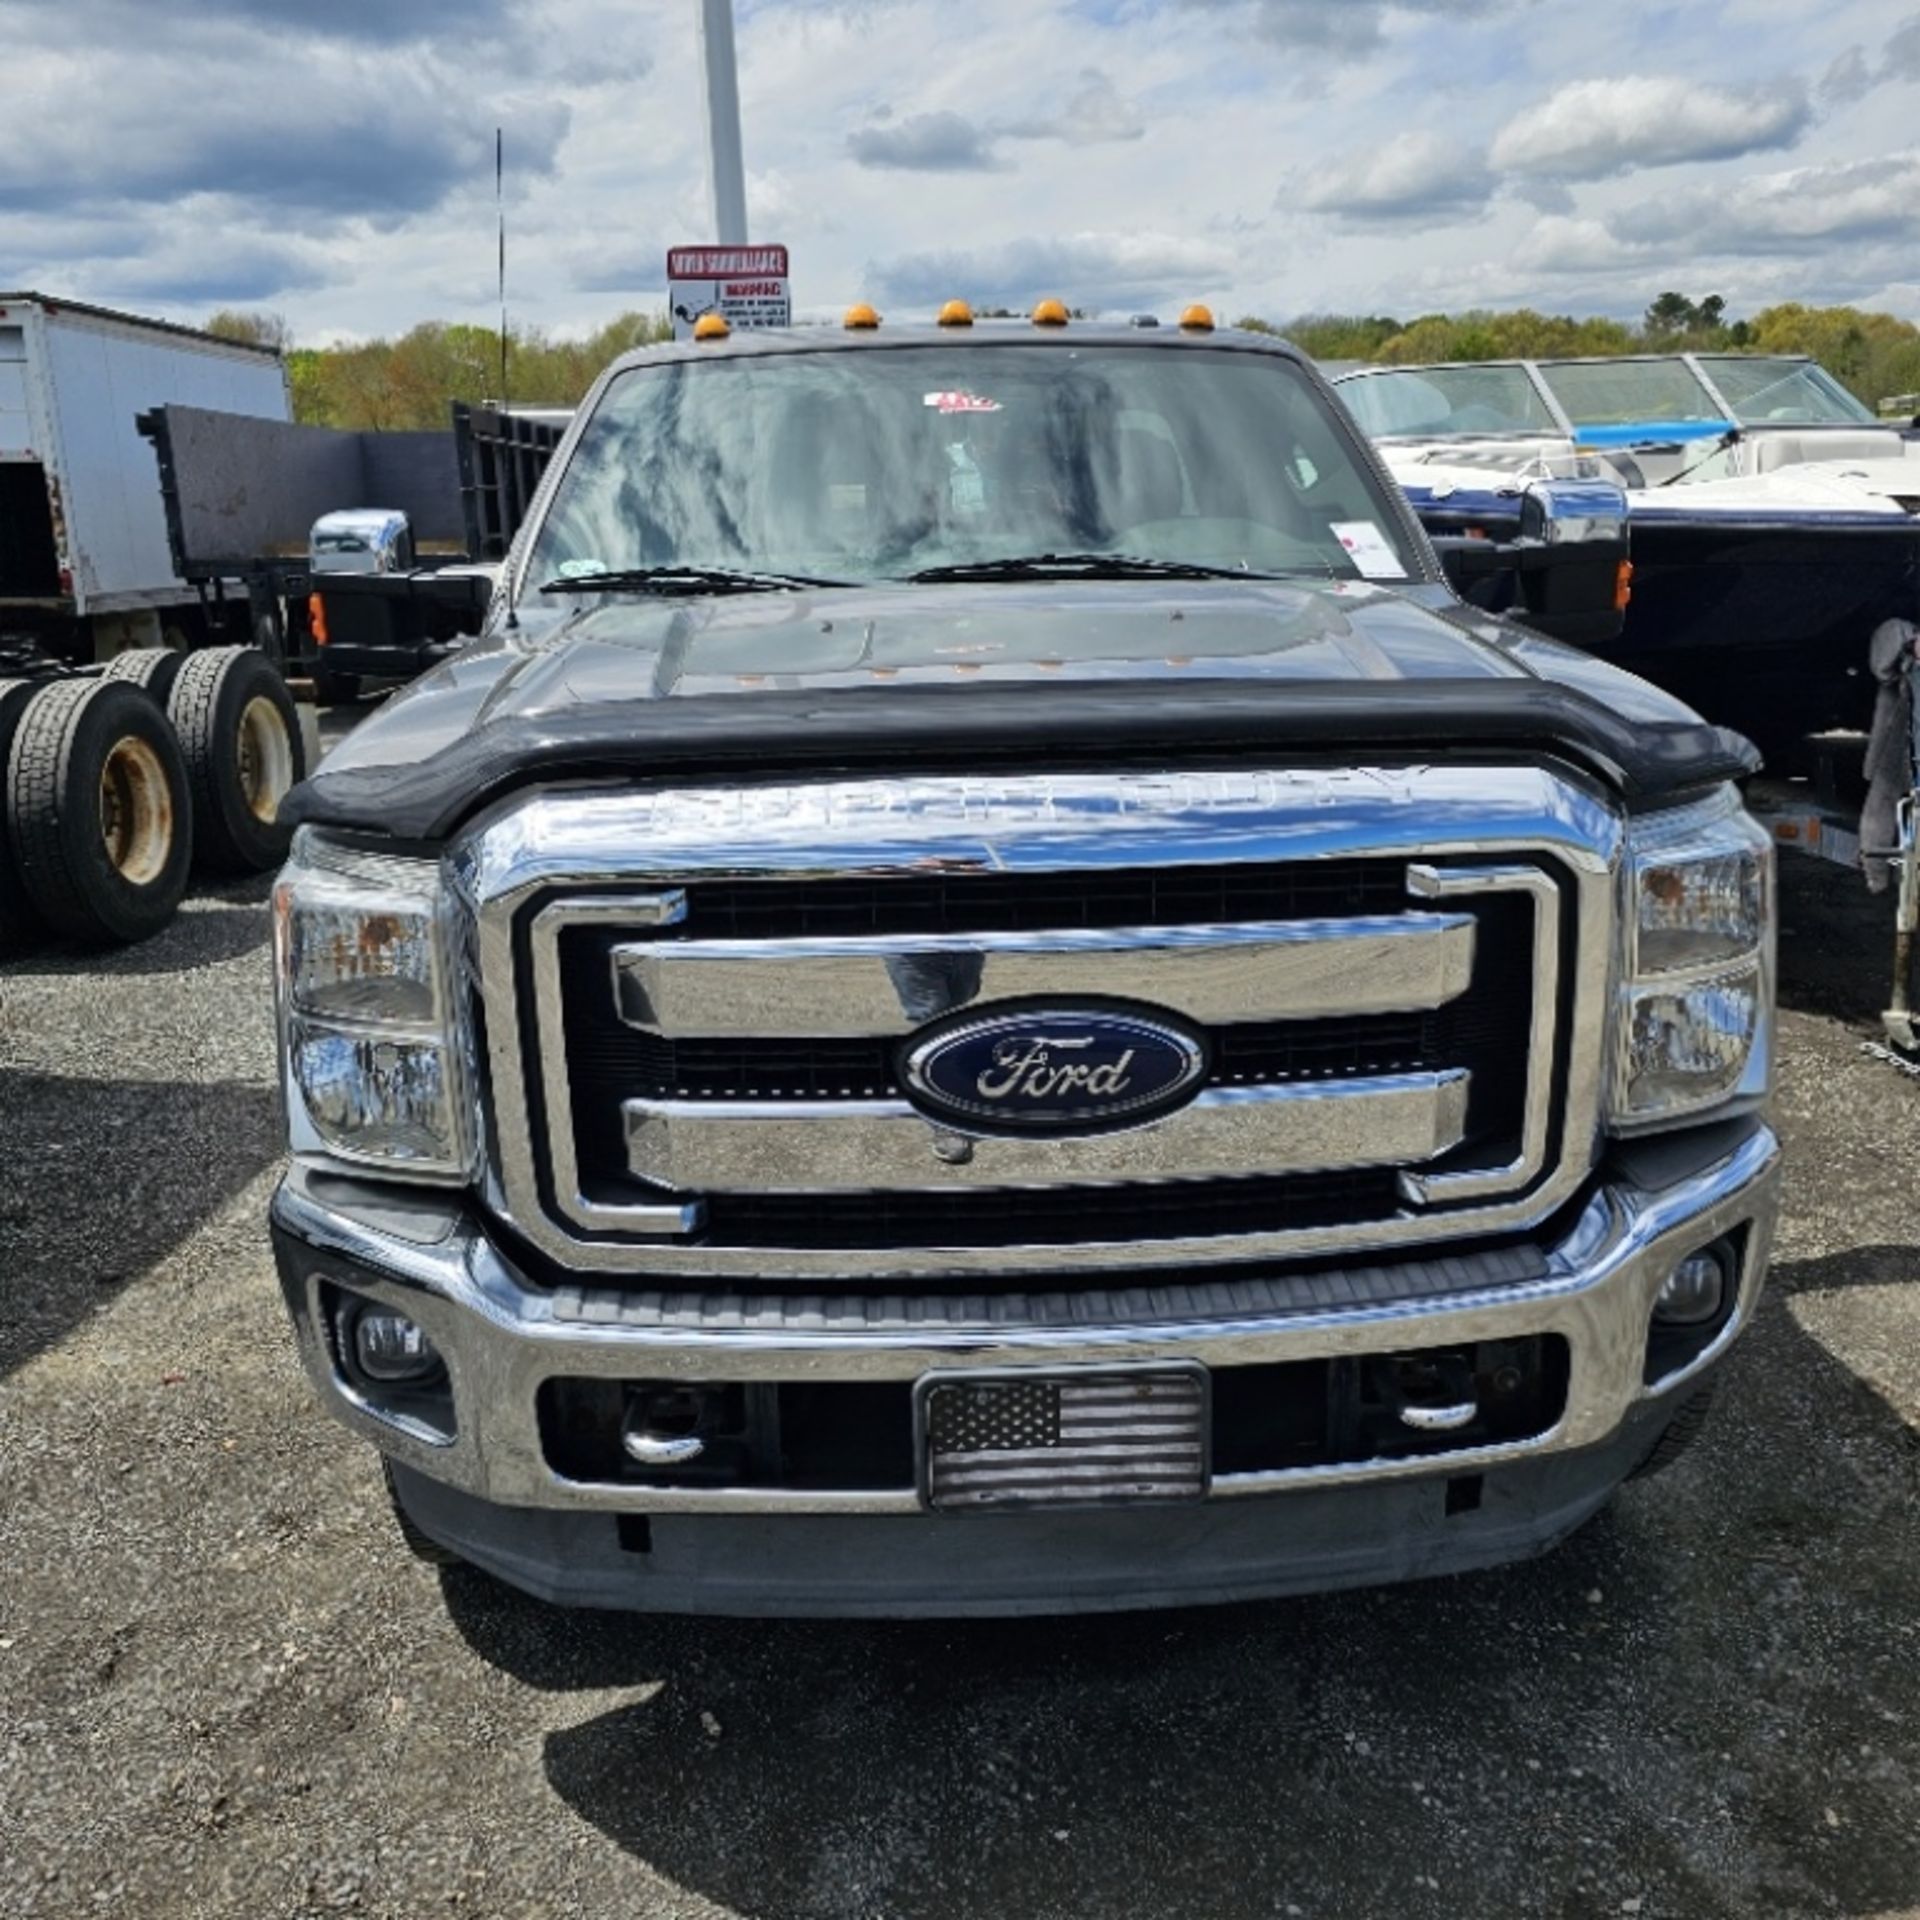 2014 Ford F250 Pickup - Image 3 of 10